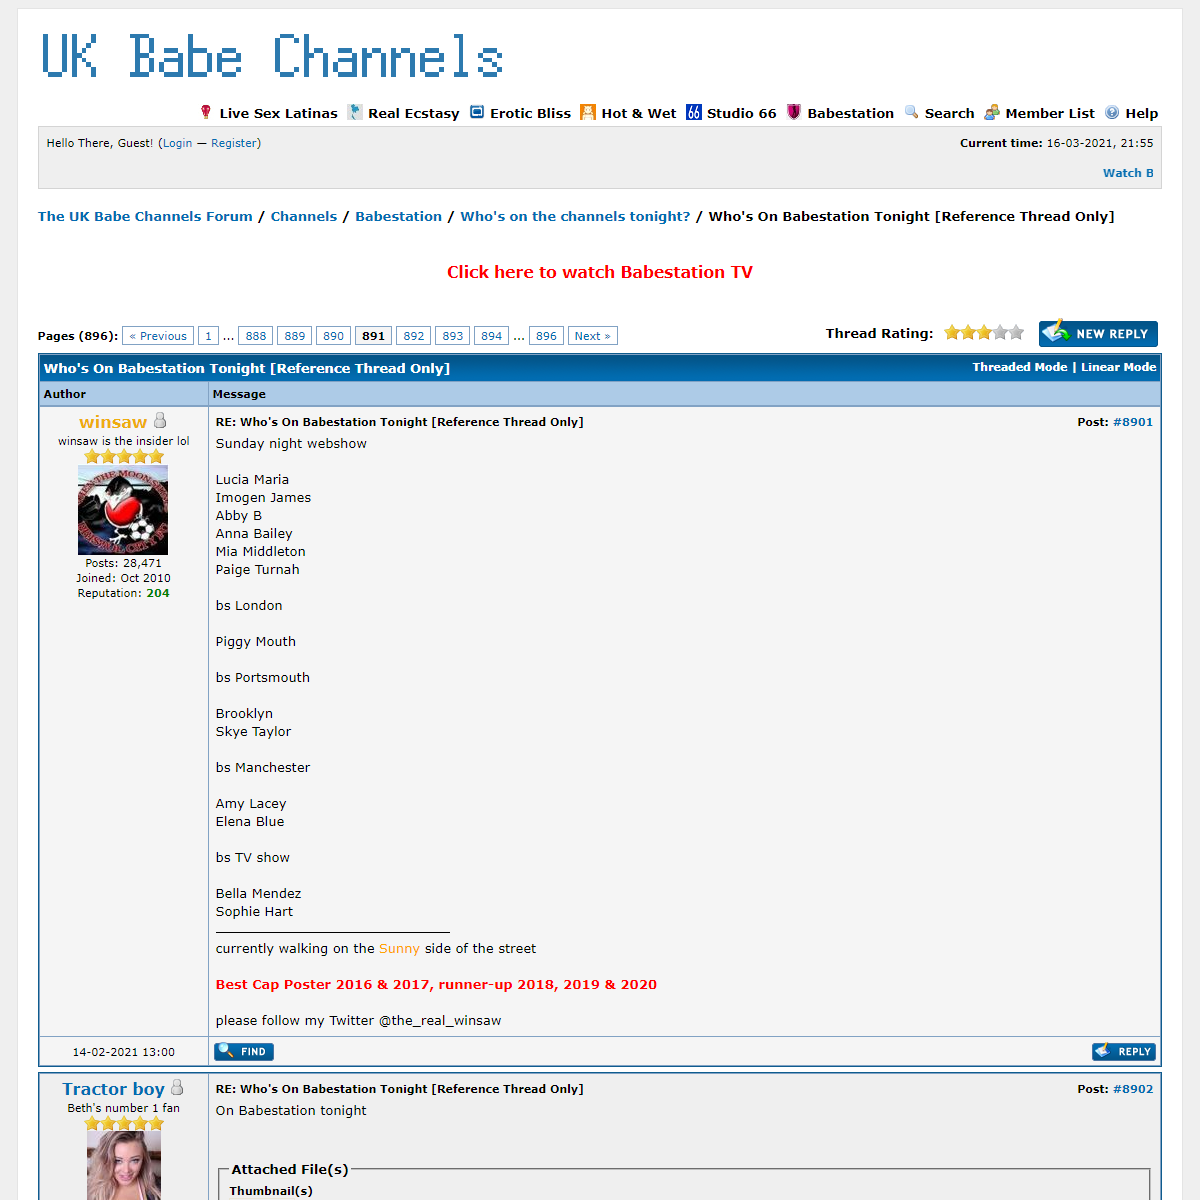 A complete backup of https://www.babeshows.co.uk/showthread.php?tid=19044&page=891